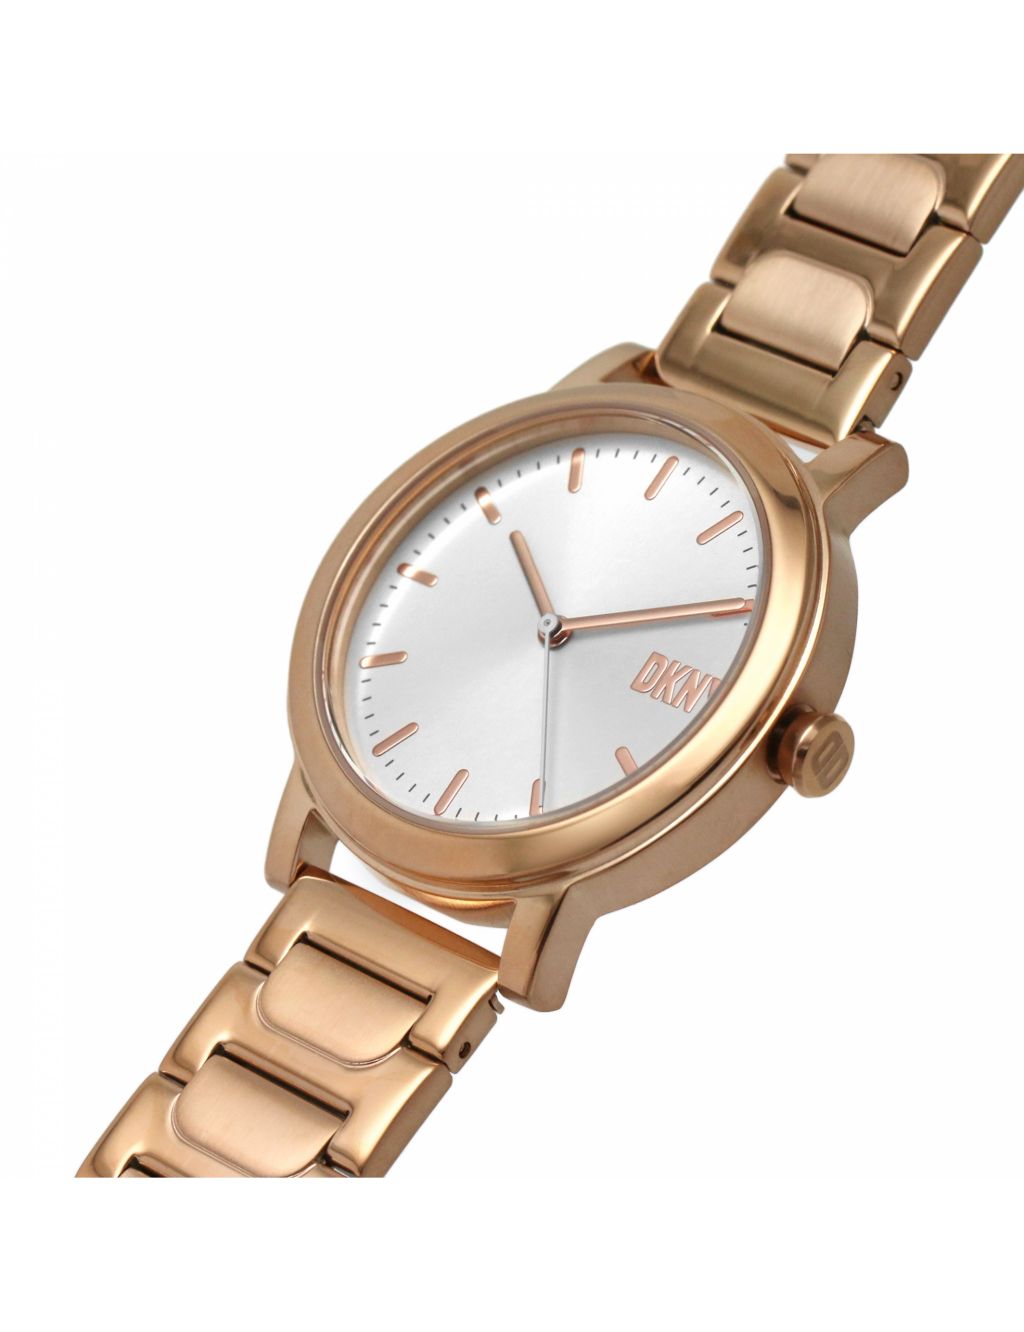 DKNY 7th Avenue Rose Gold Stainless Steel Watch image 5